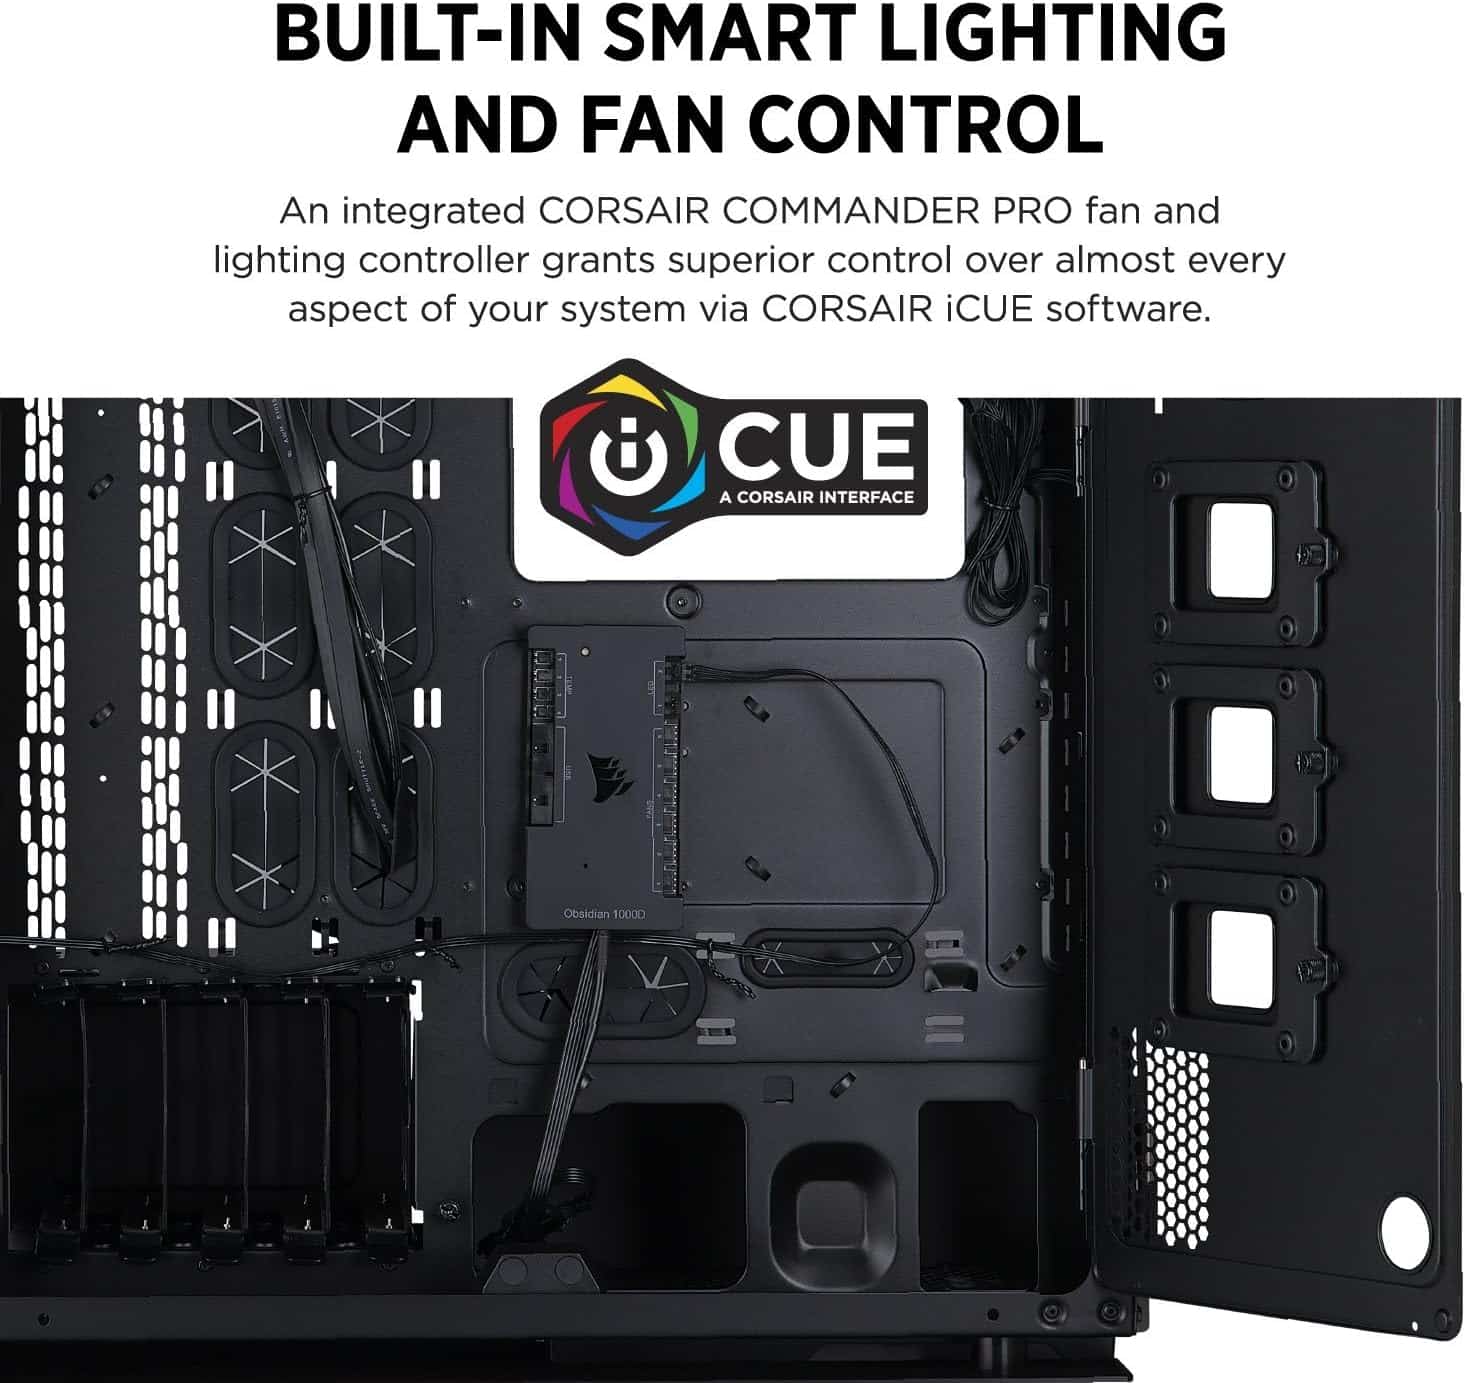 Corsair Obsidian Series 1000D Super-Tower Case: The Ultimate Gaming Powerhouse